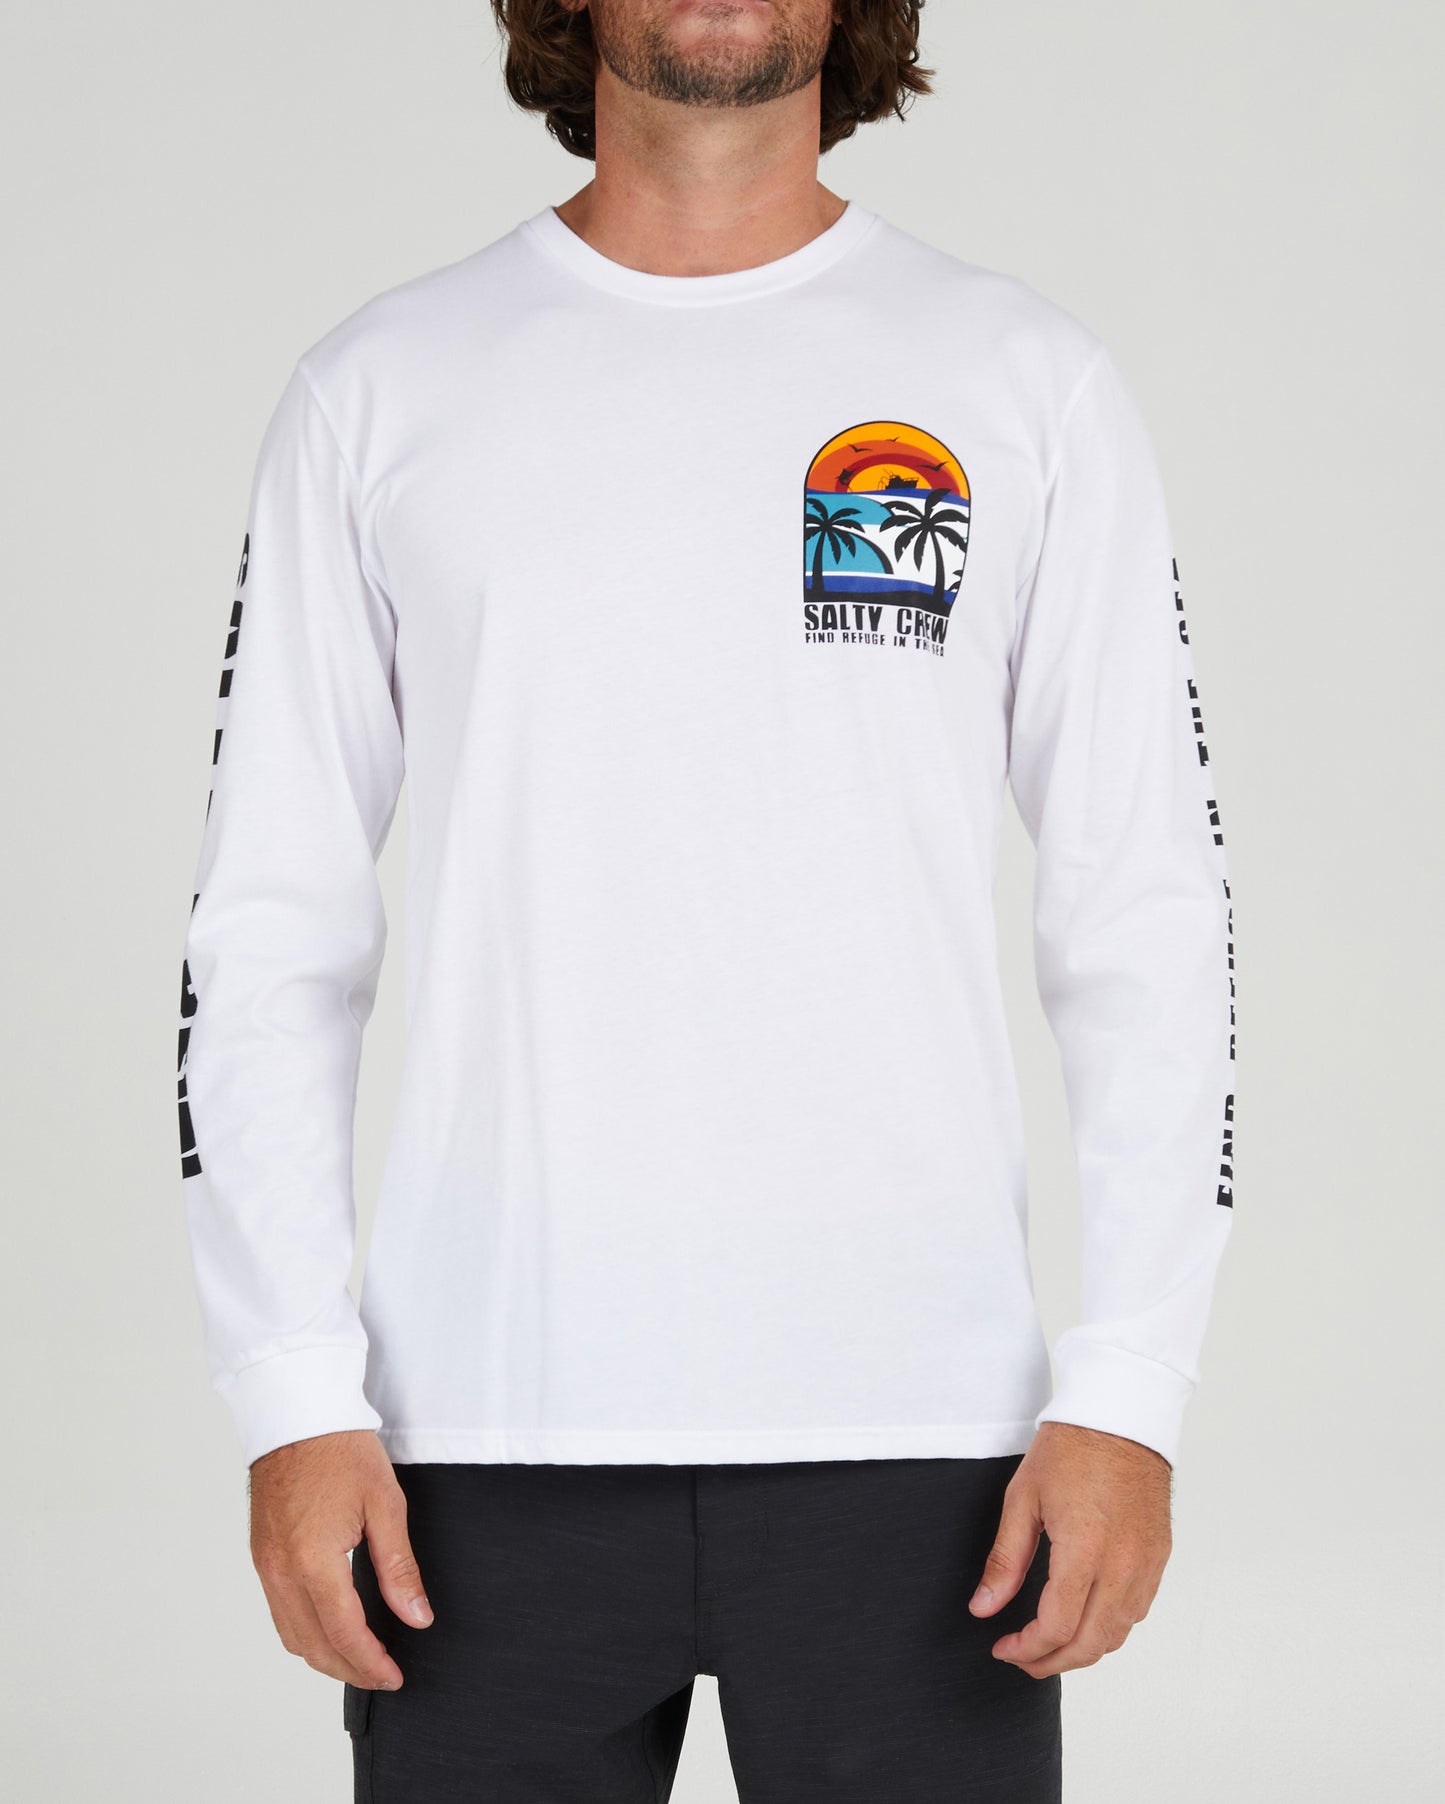 On body front of the Beach Day White L/S Premium Tee